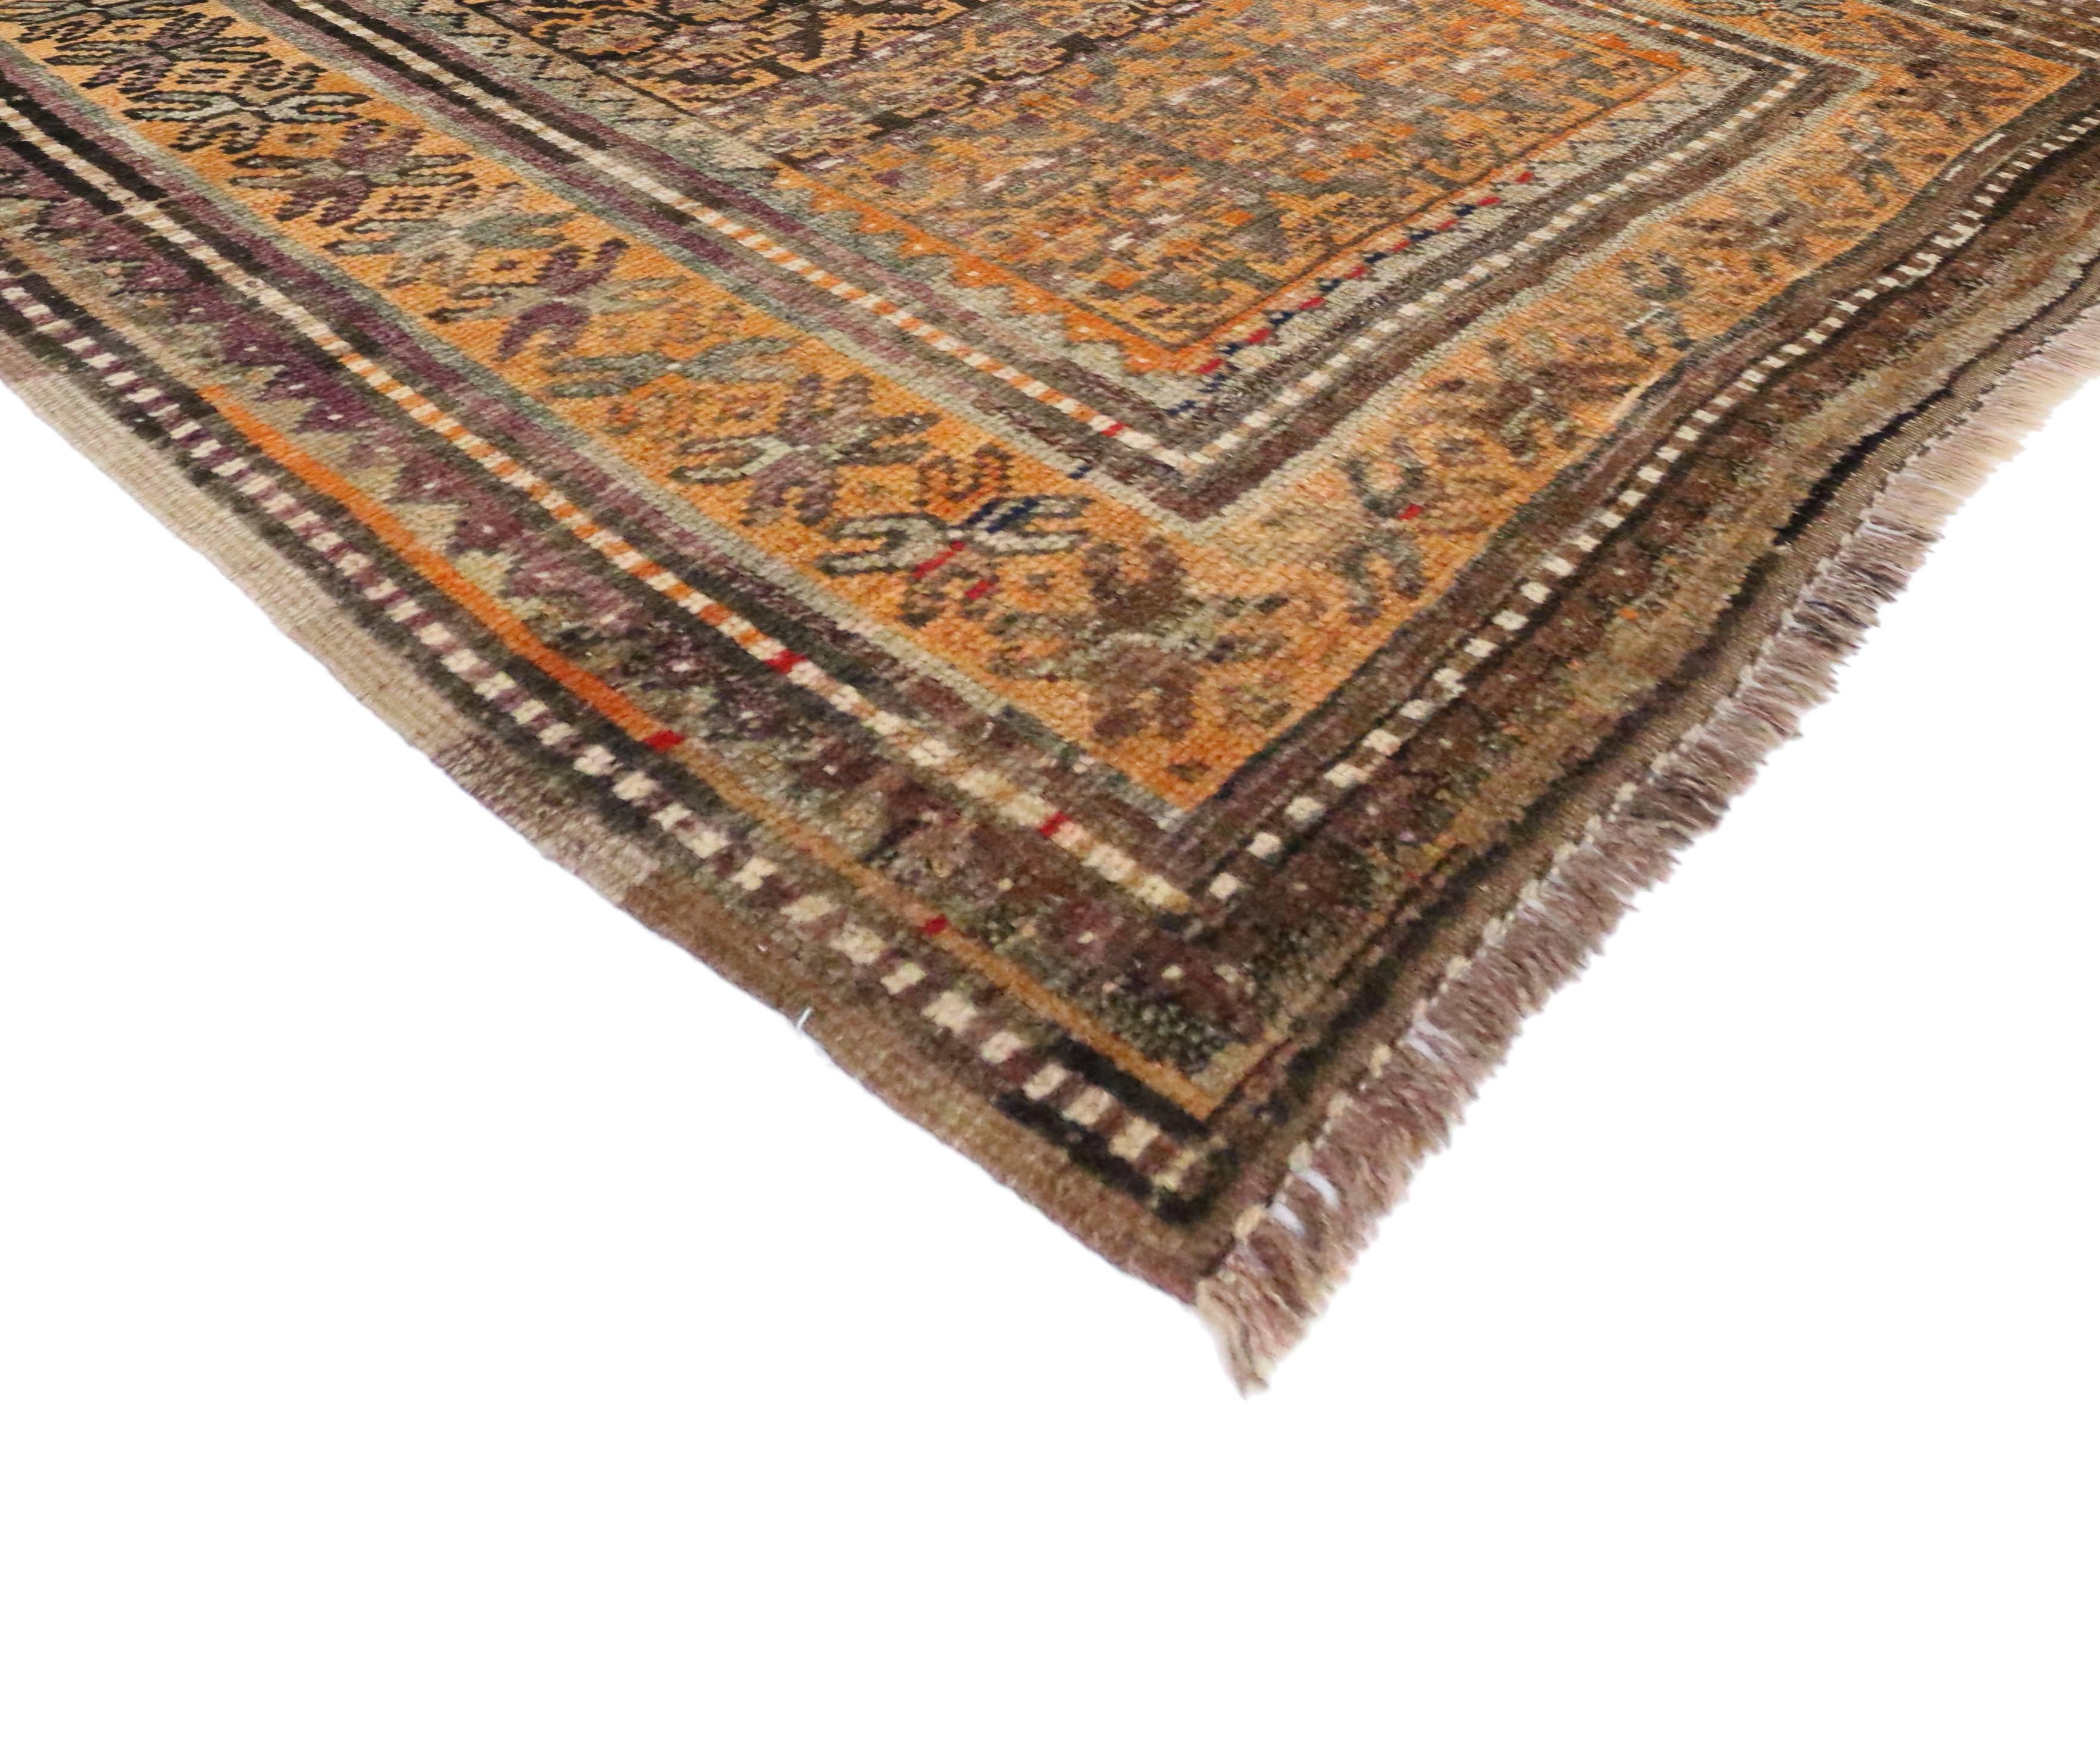 Vintage Shiraz Persian Tribal Rug with Mid-Century Modern Style For Sale 2